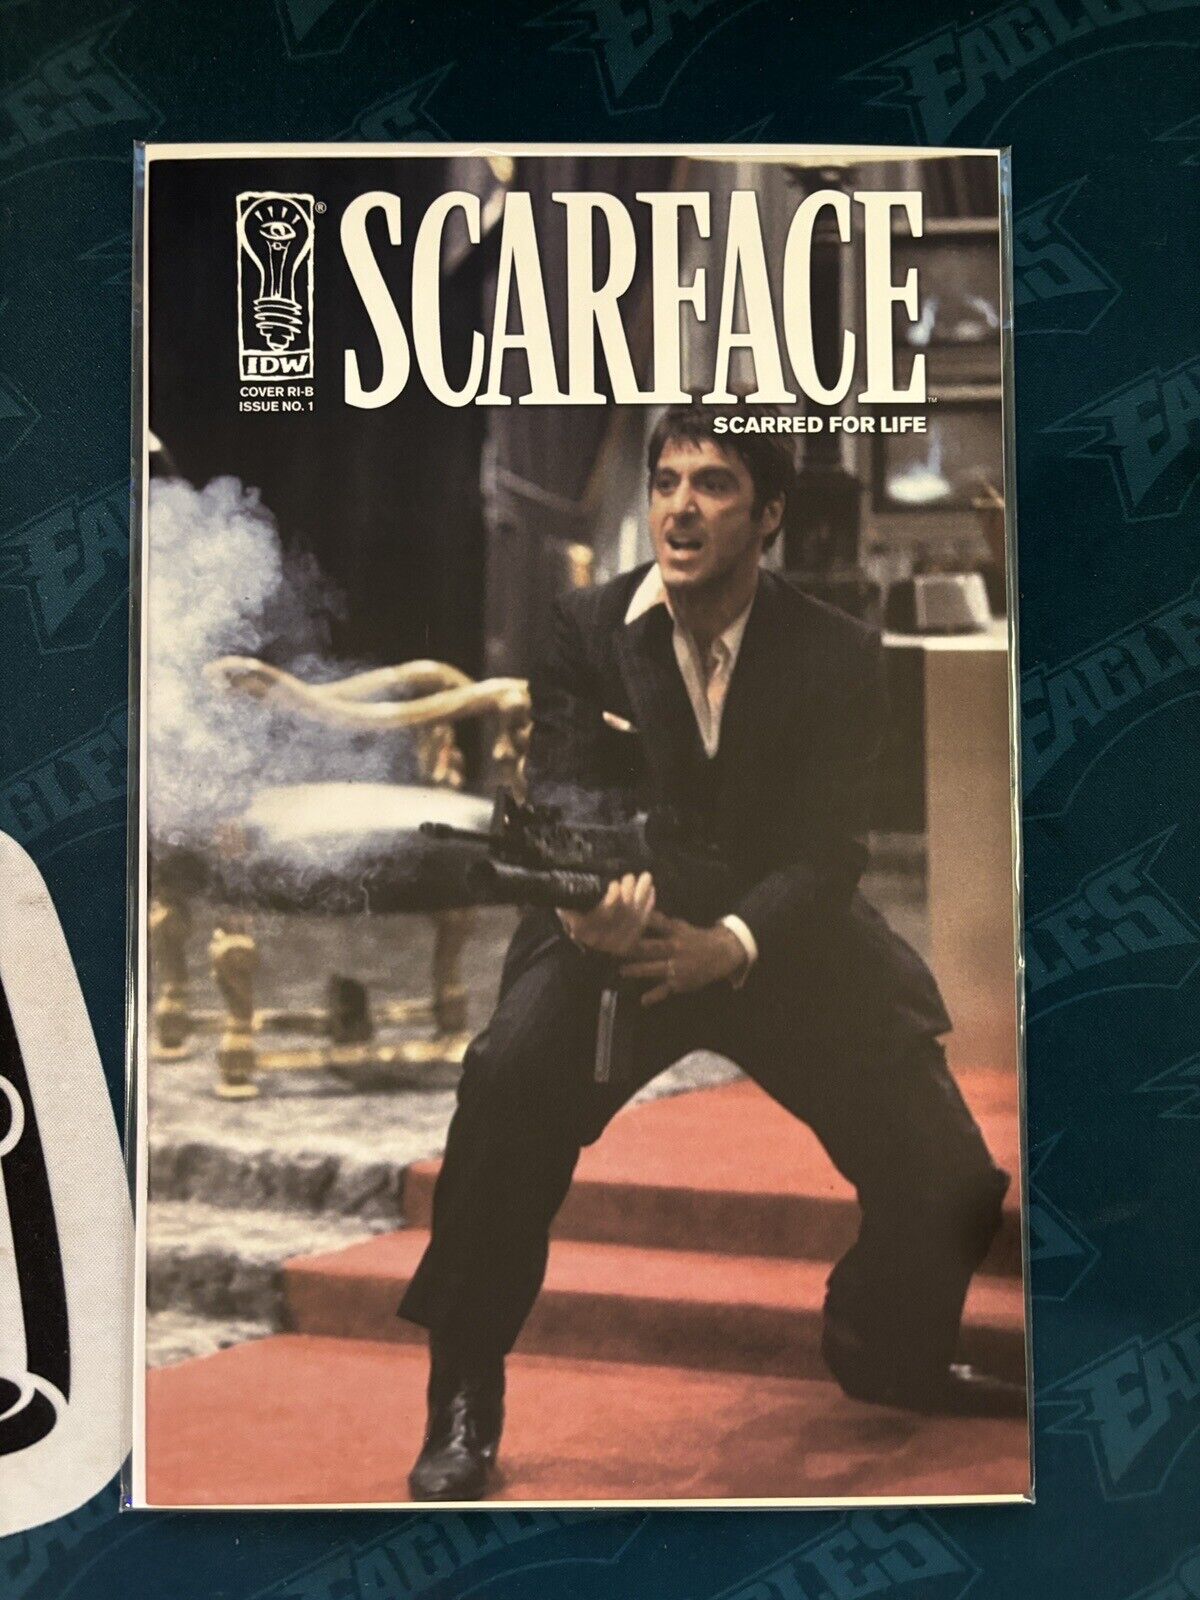 SCARFACE Scarred For Life #1 IDW Comics 2006 Wraparound Cover  - NM